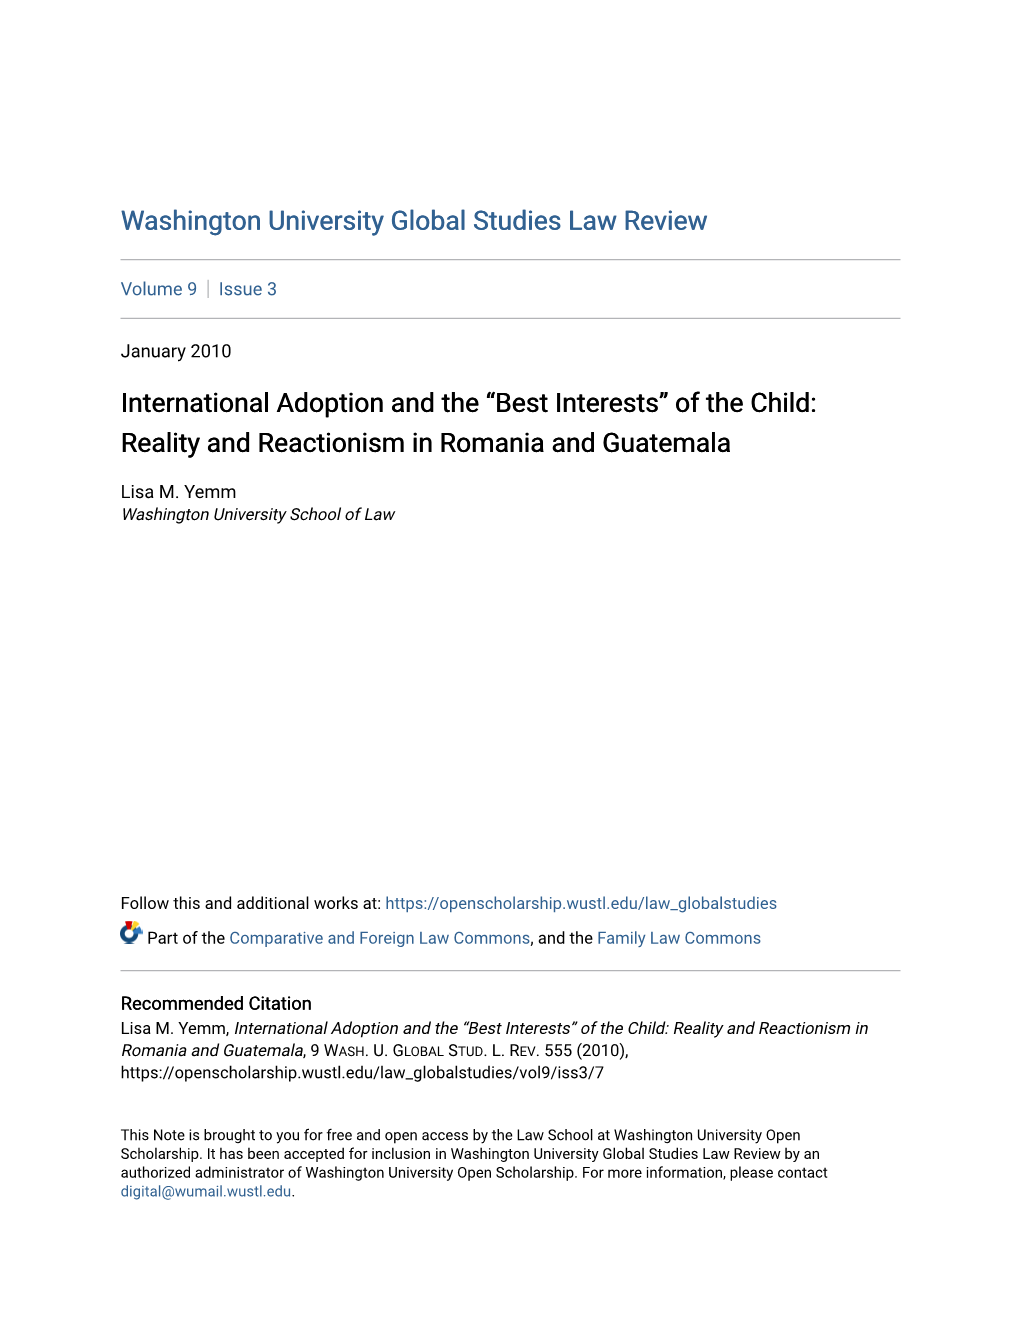 International Adoption and the “Best Interests” of the Child: Reality and Reactionism in Romania and Guatemala